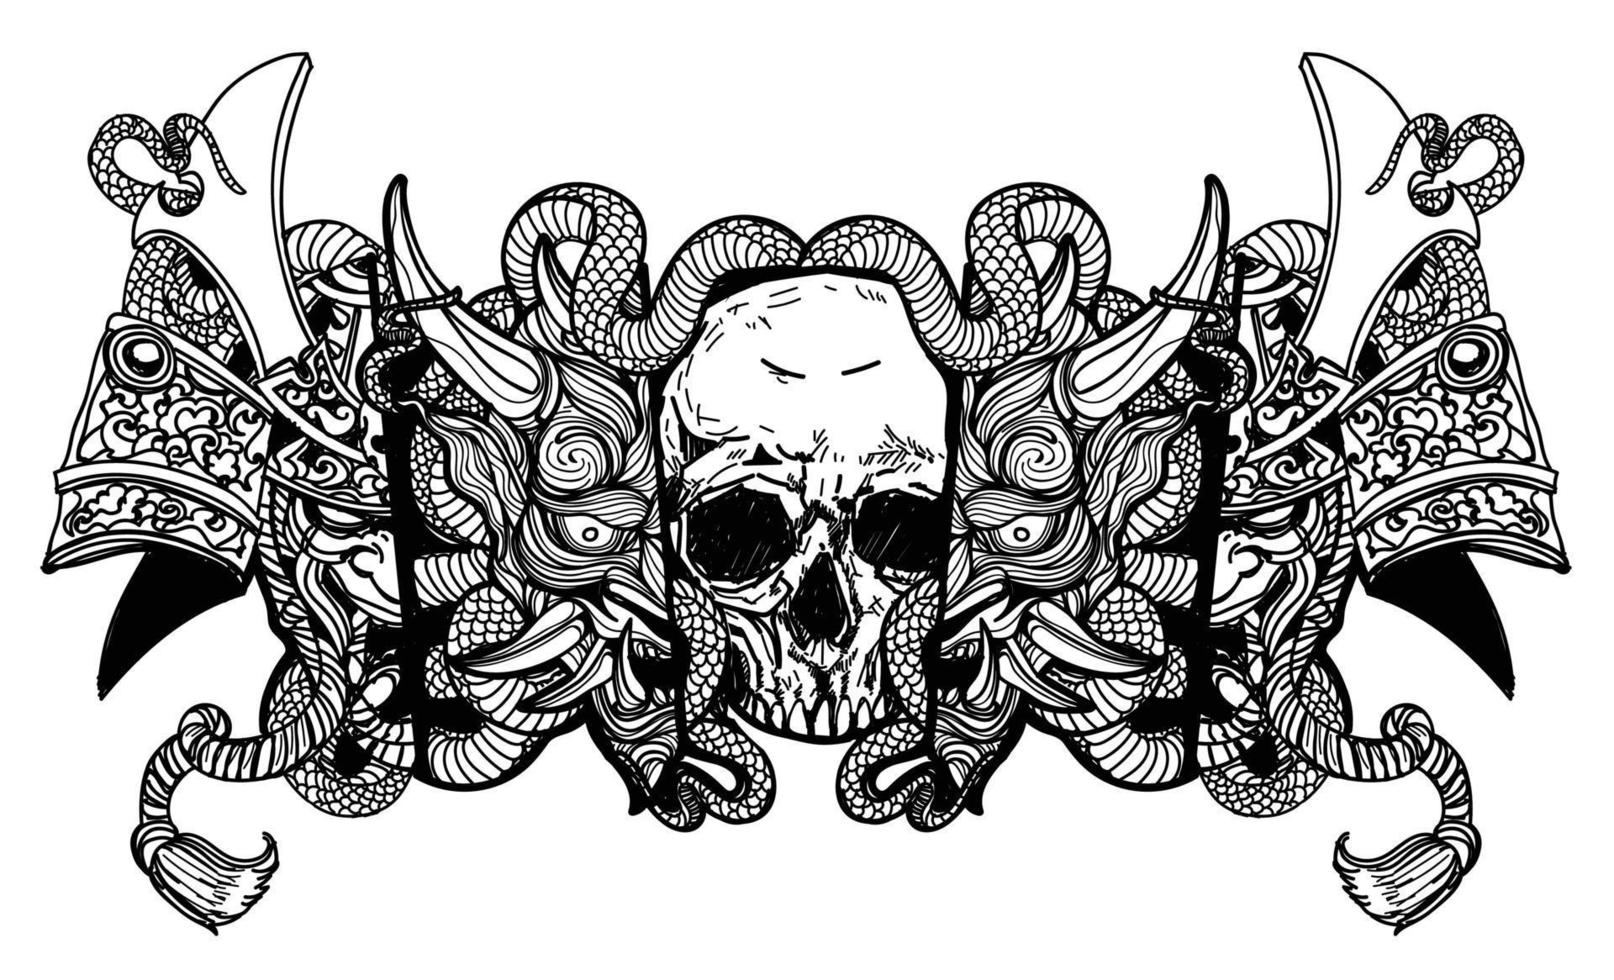 Tattoo art skull devil mask and snake drawing sketch black and white vector